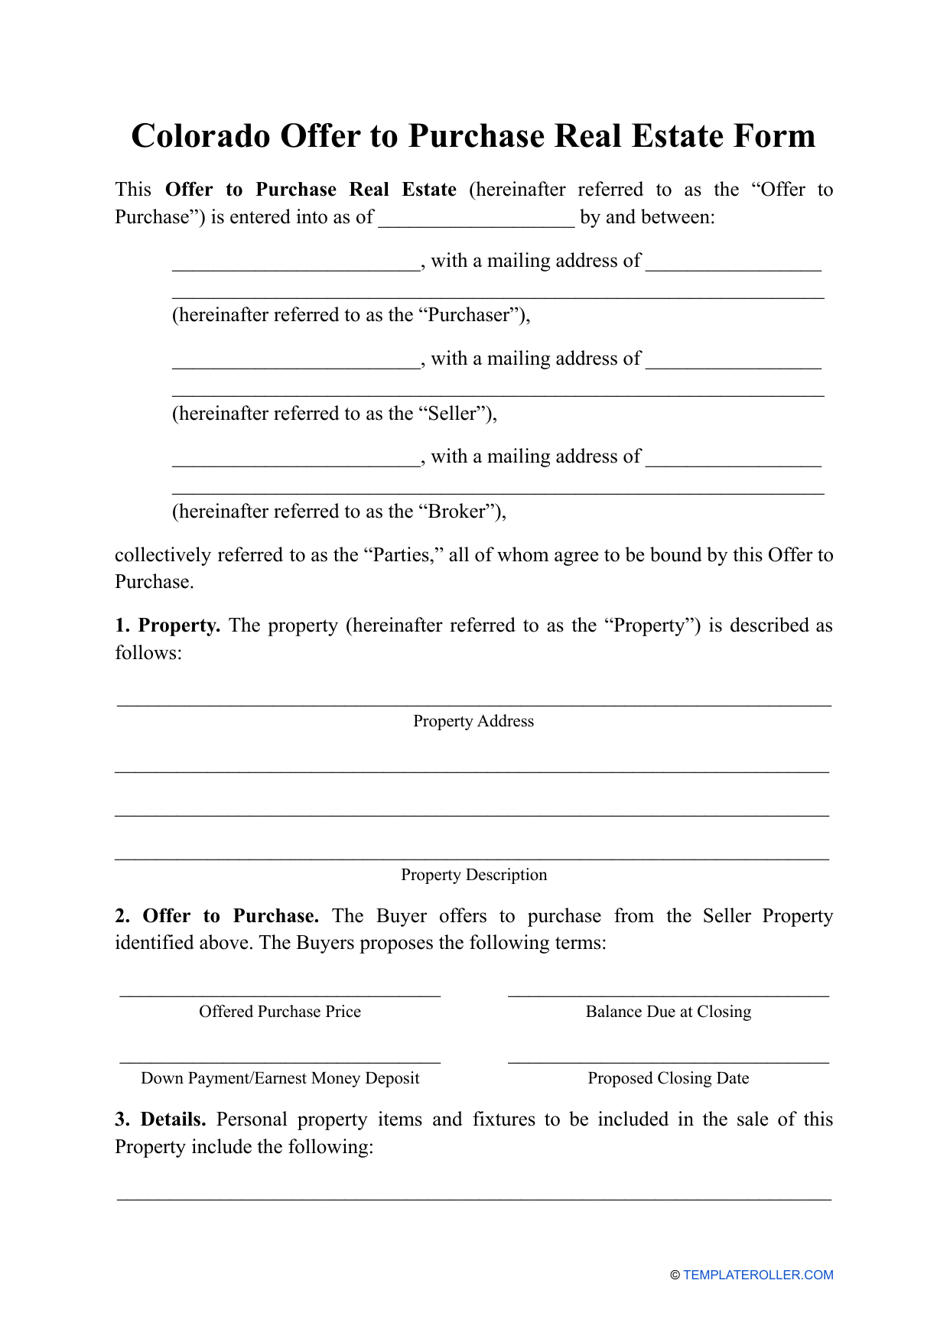 Offer to Purchase Real Estate Form - Colorado, Page 1